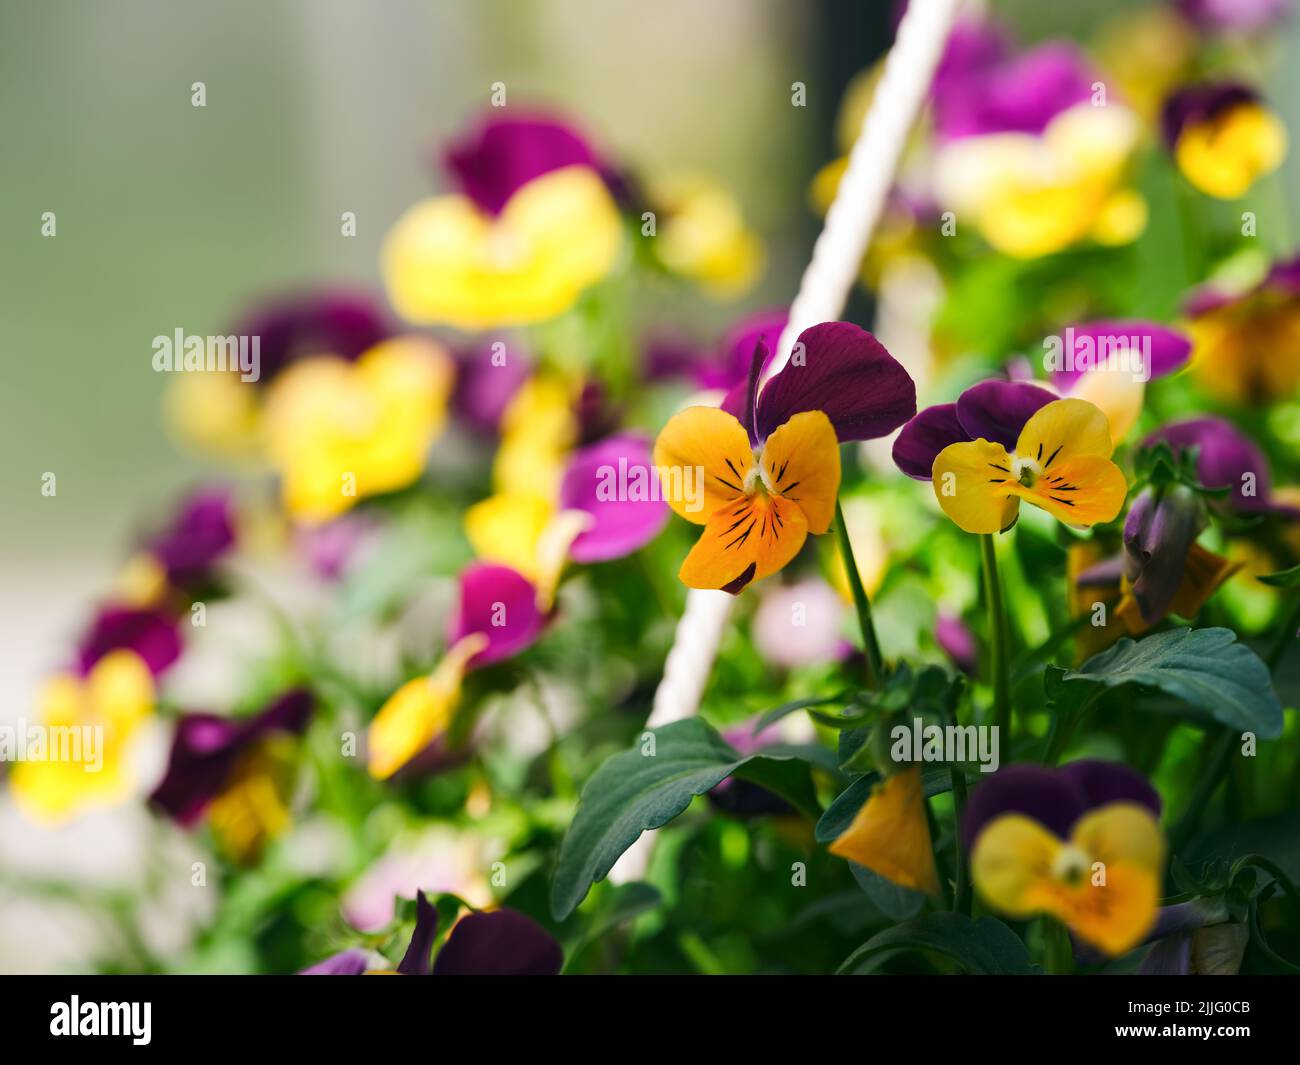 A close-up shot of yellow and violet pansies Stock Photo